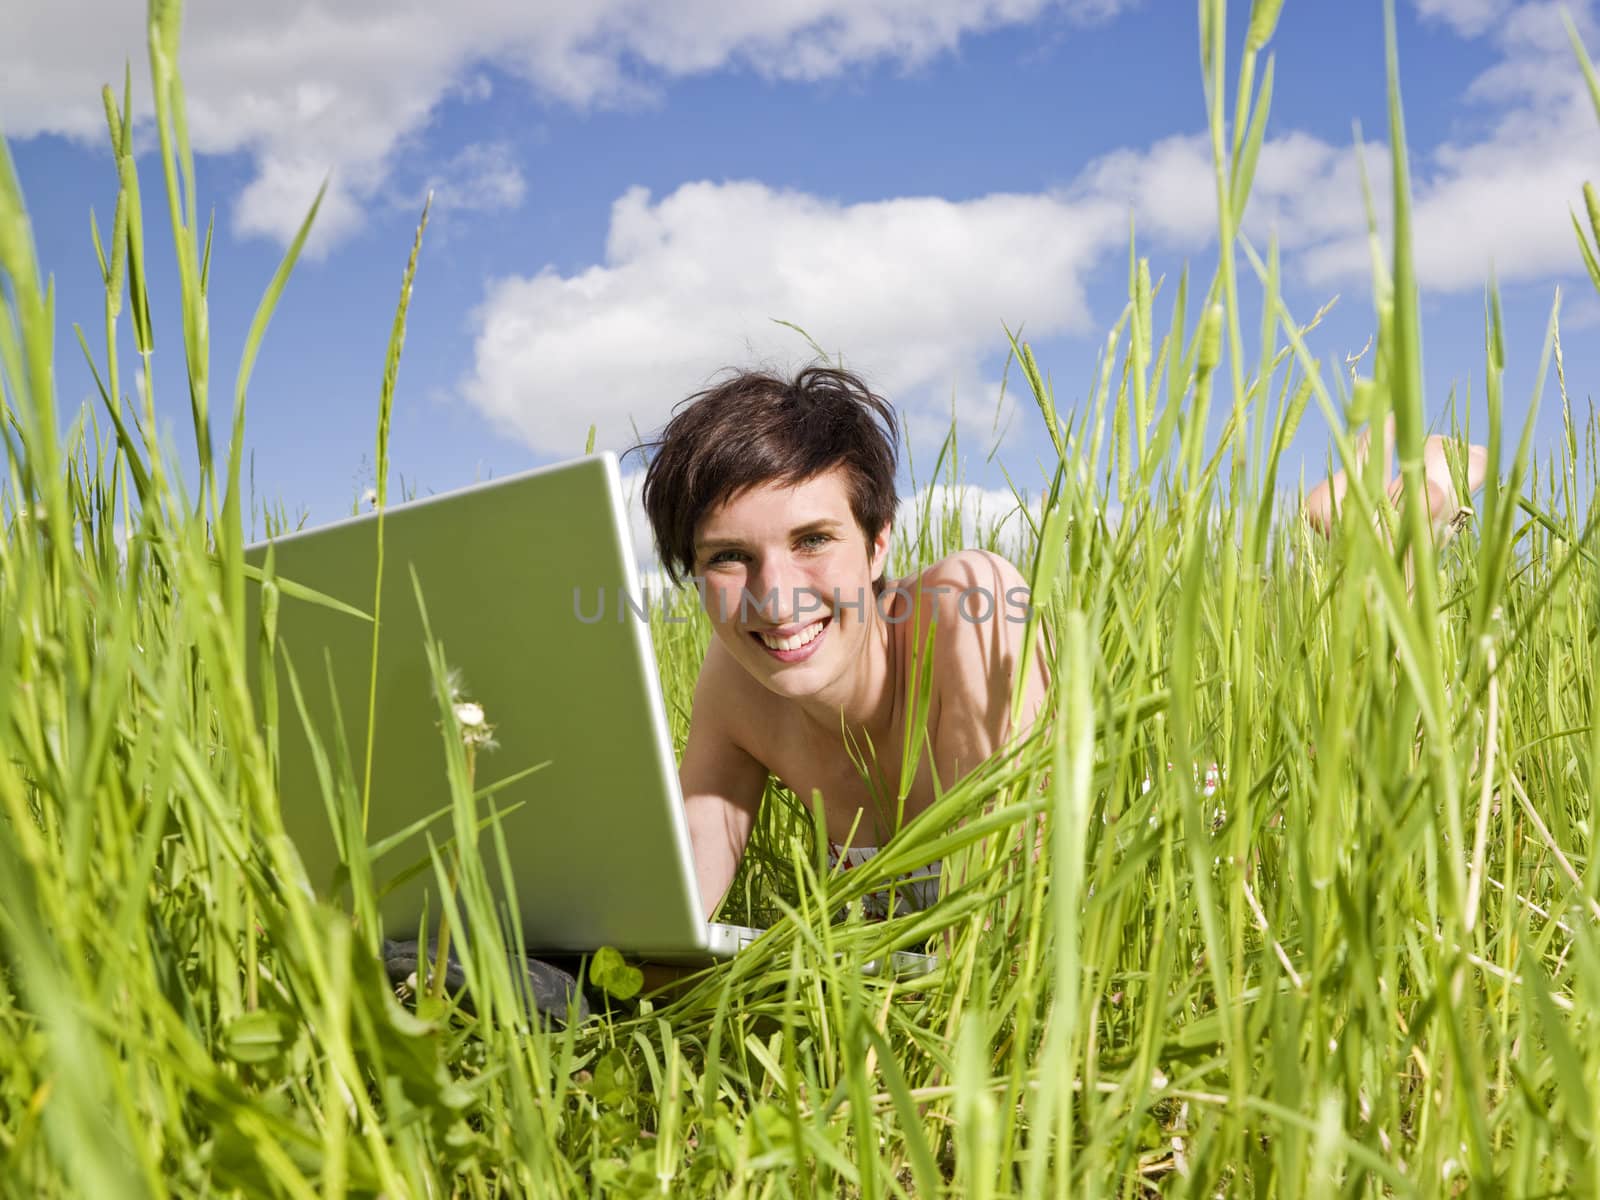 Smiling Woman with her computer in the grass by gemenacom